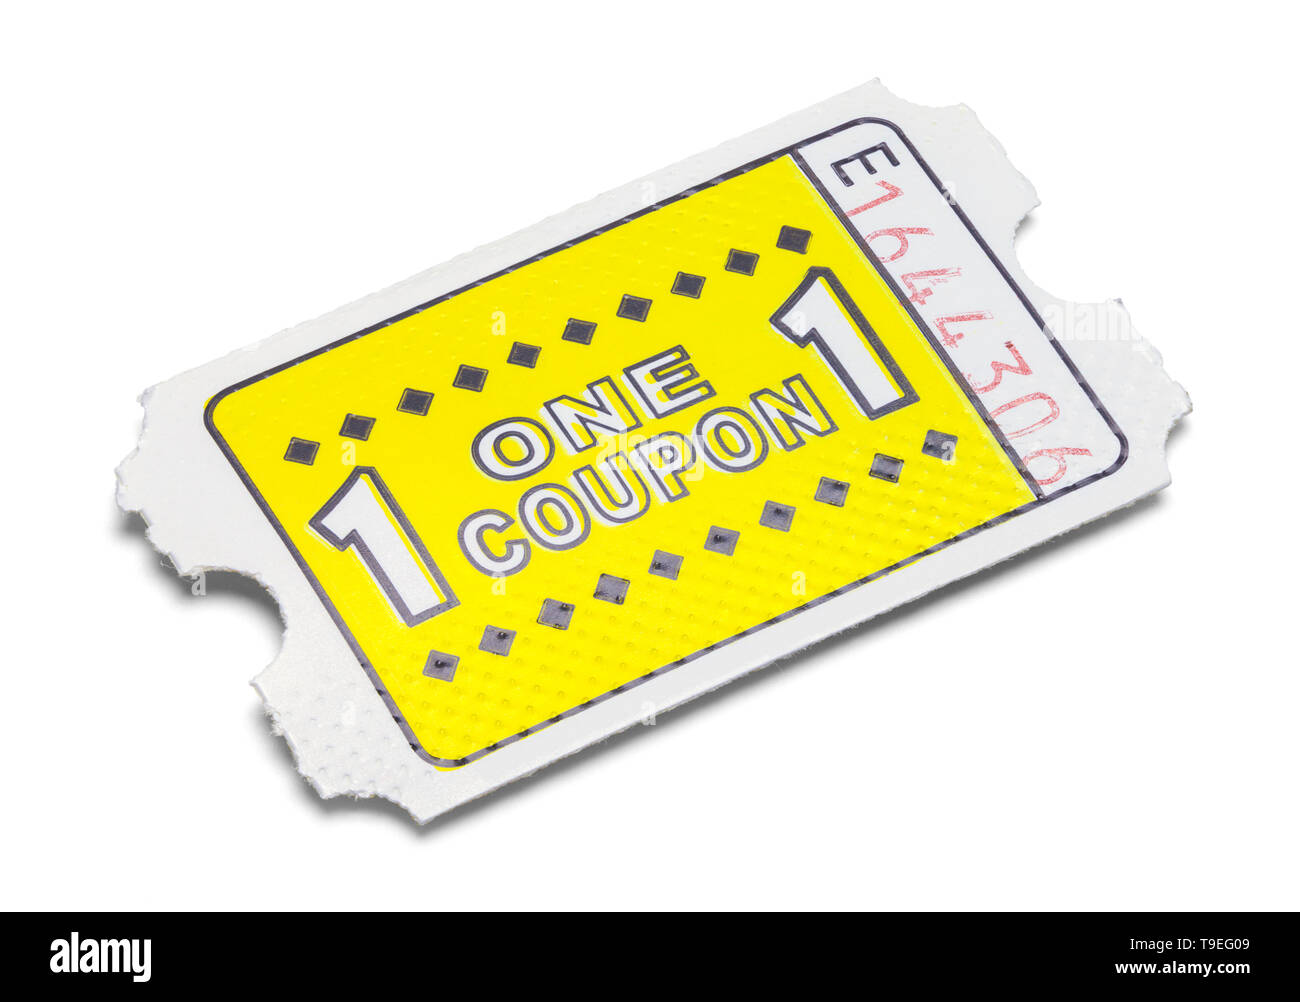 One Yellow Game Coupon Ticket Isolated on White. Stock Photo